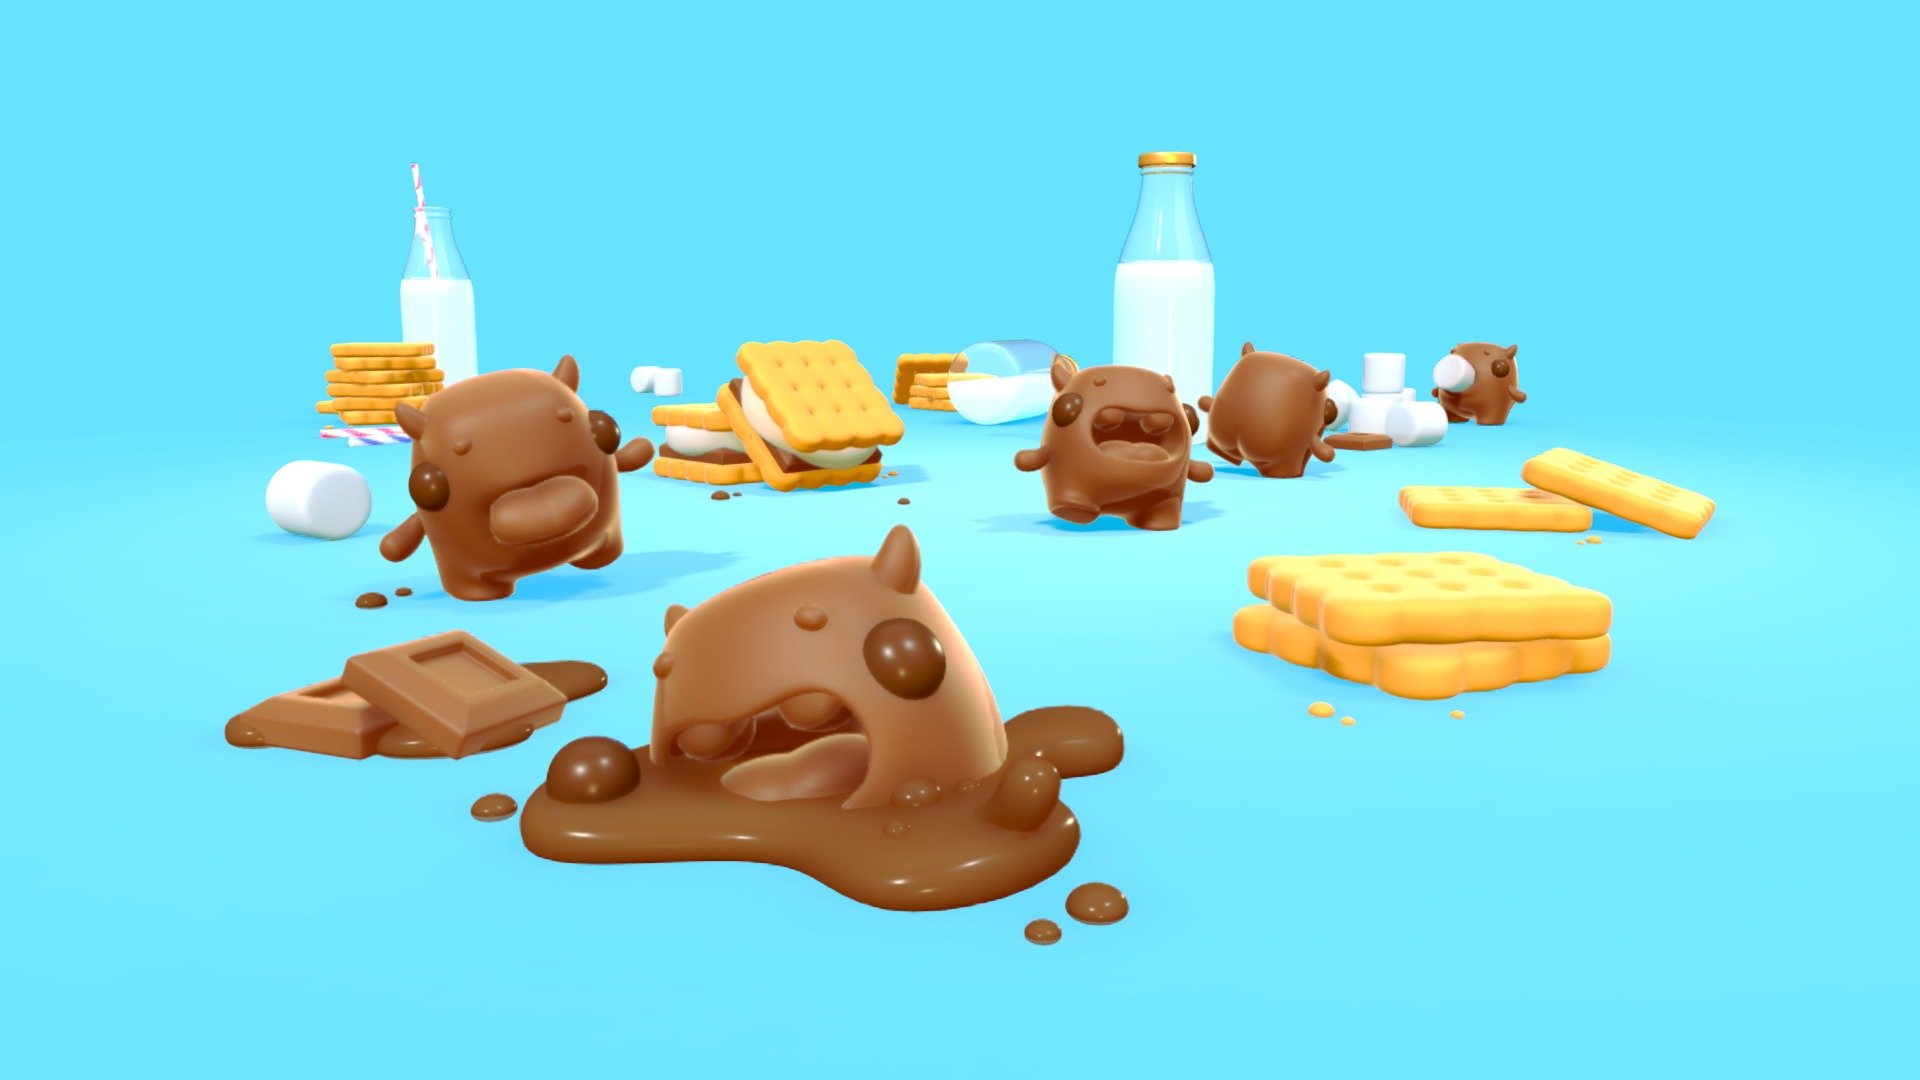 Here's a scene I made for my love of chocolate! The real renders with bonus images are available on my Artstation!
https://www.artstation.com/artwork/WBaPDJ

I'm working on making 3D printed figures of these creatures so stay tuned! - Choco Monsters - 3D model by L3X 3d model